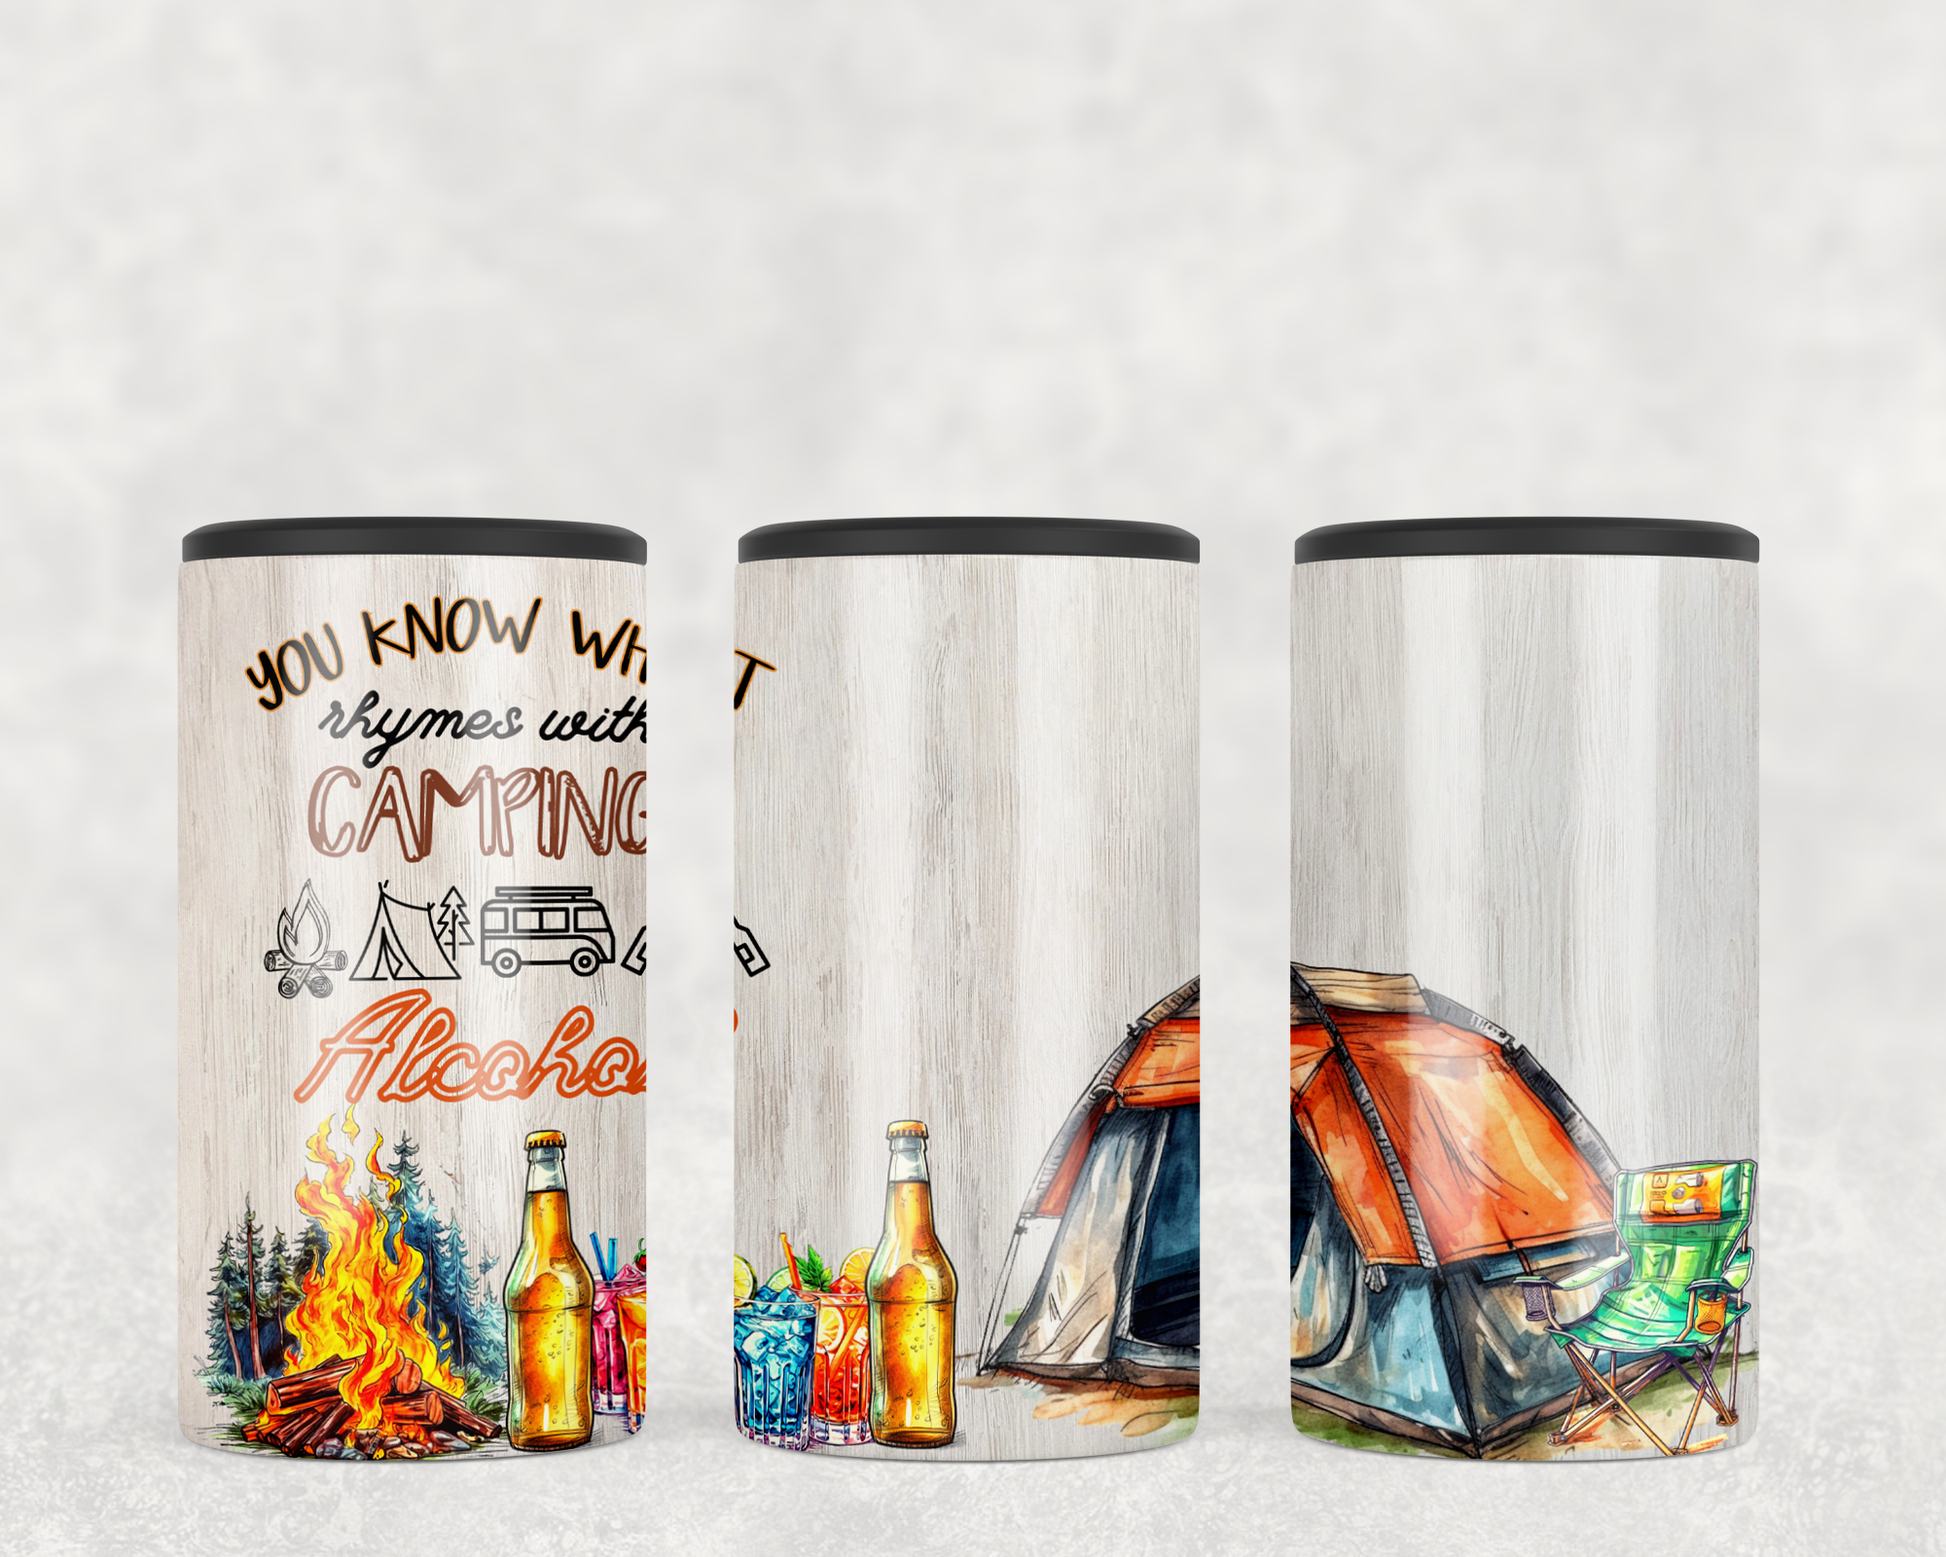 Camping tent design. Camping rhymes with alcohol 4-in-1 slim can cooler